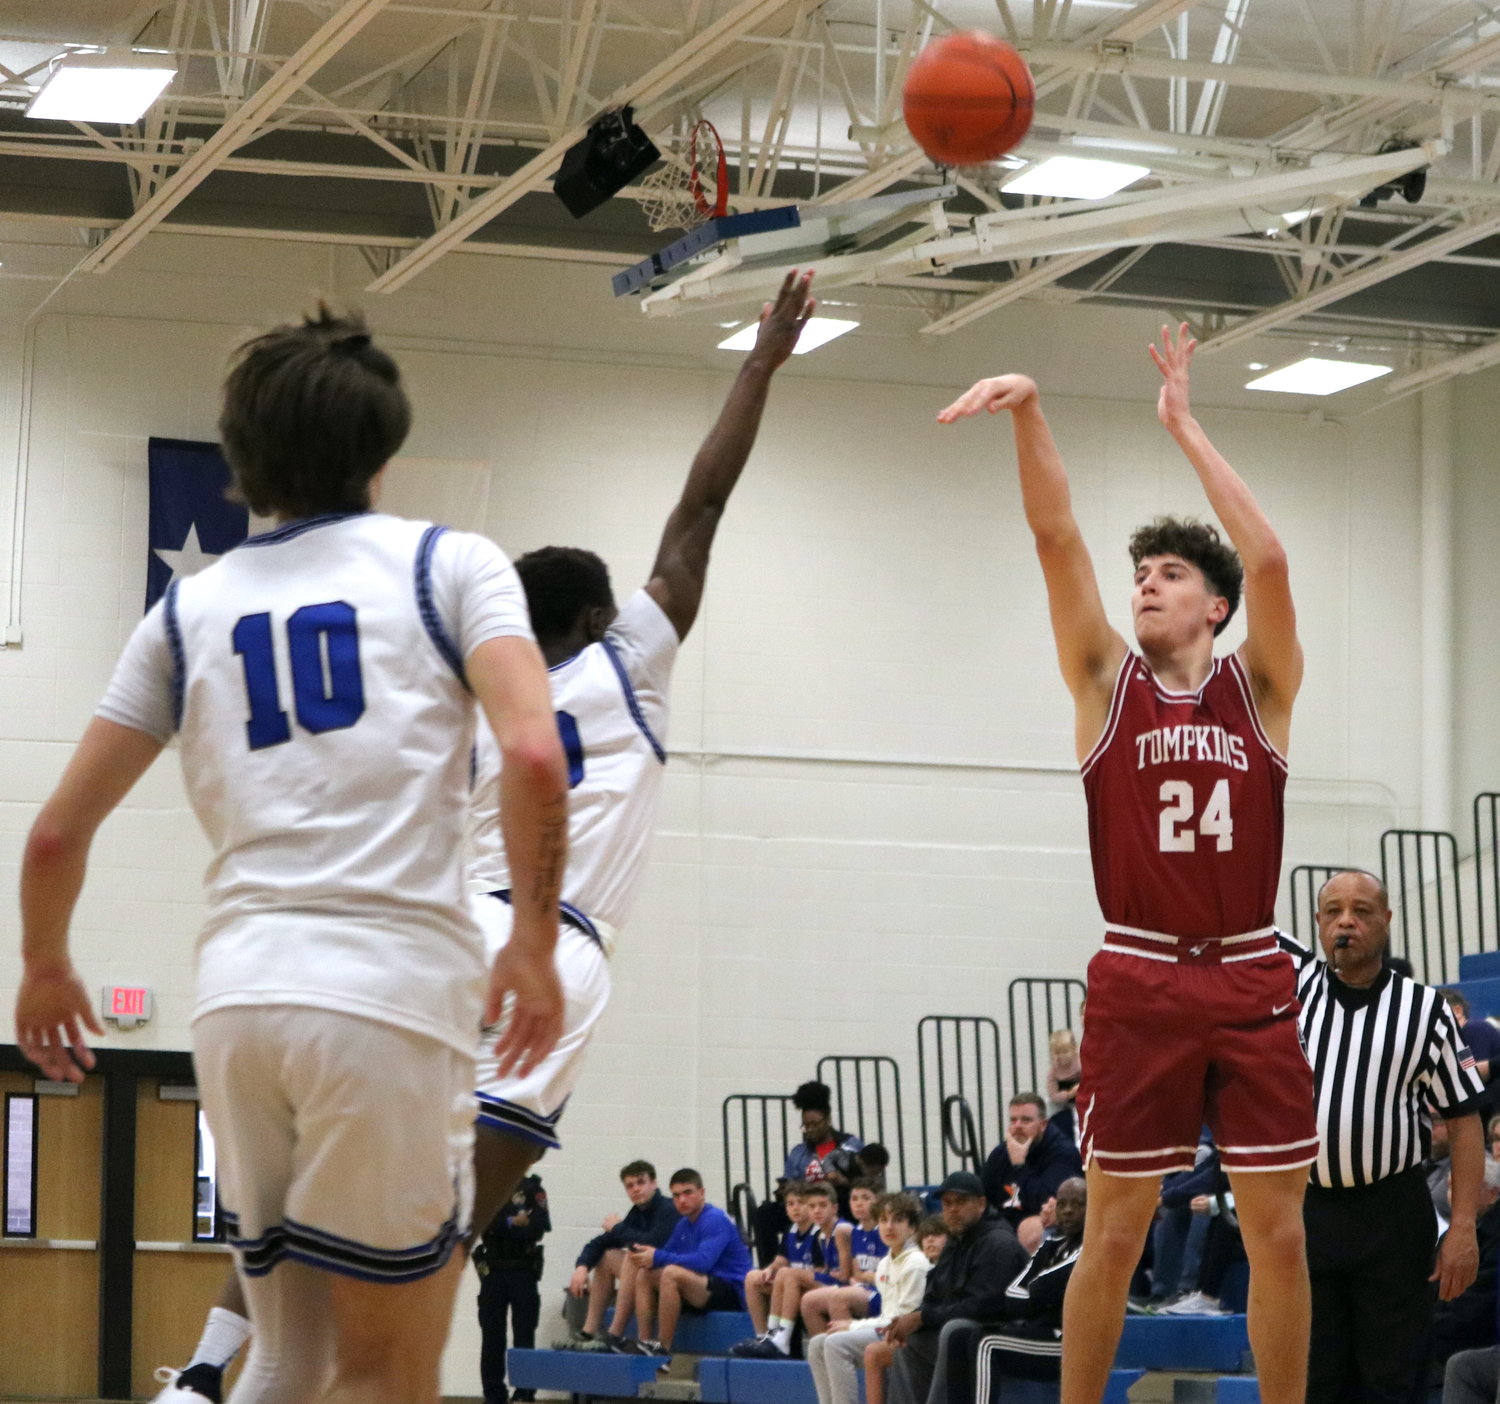 Grant Schulenberg shoots a jumper during Saturday's game between Tompkins and Taylor at the Taylor gym.